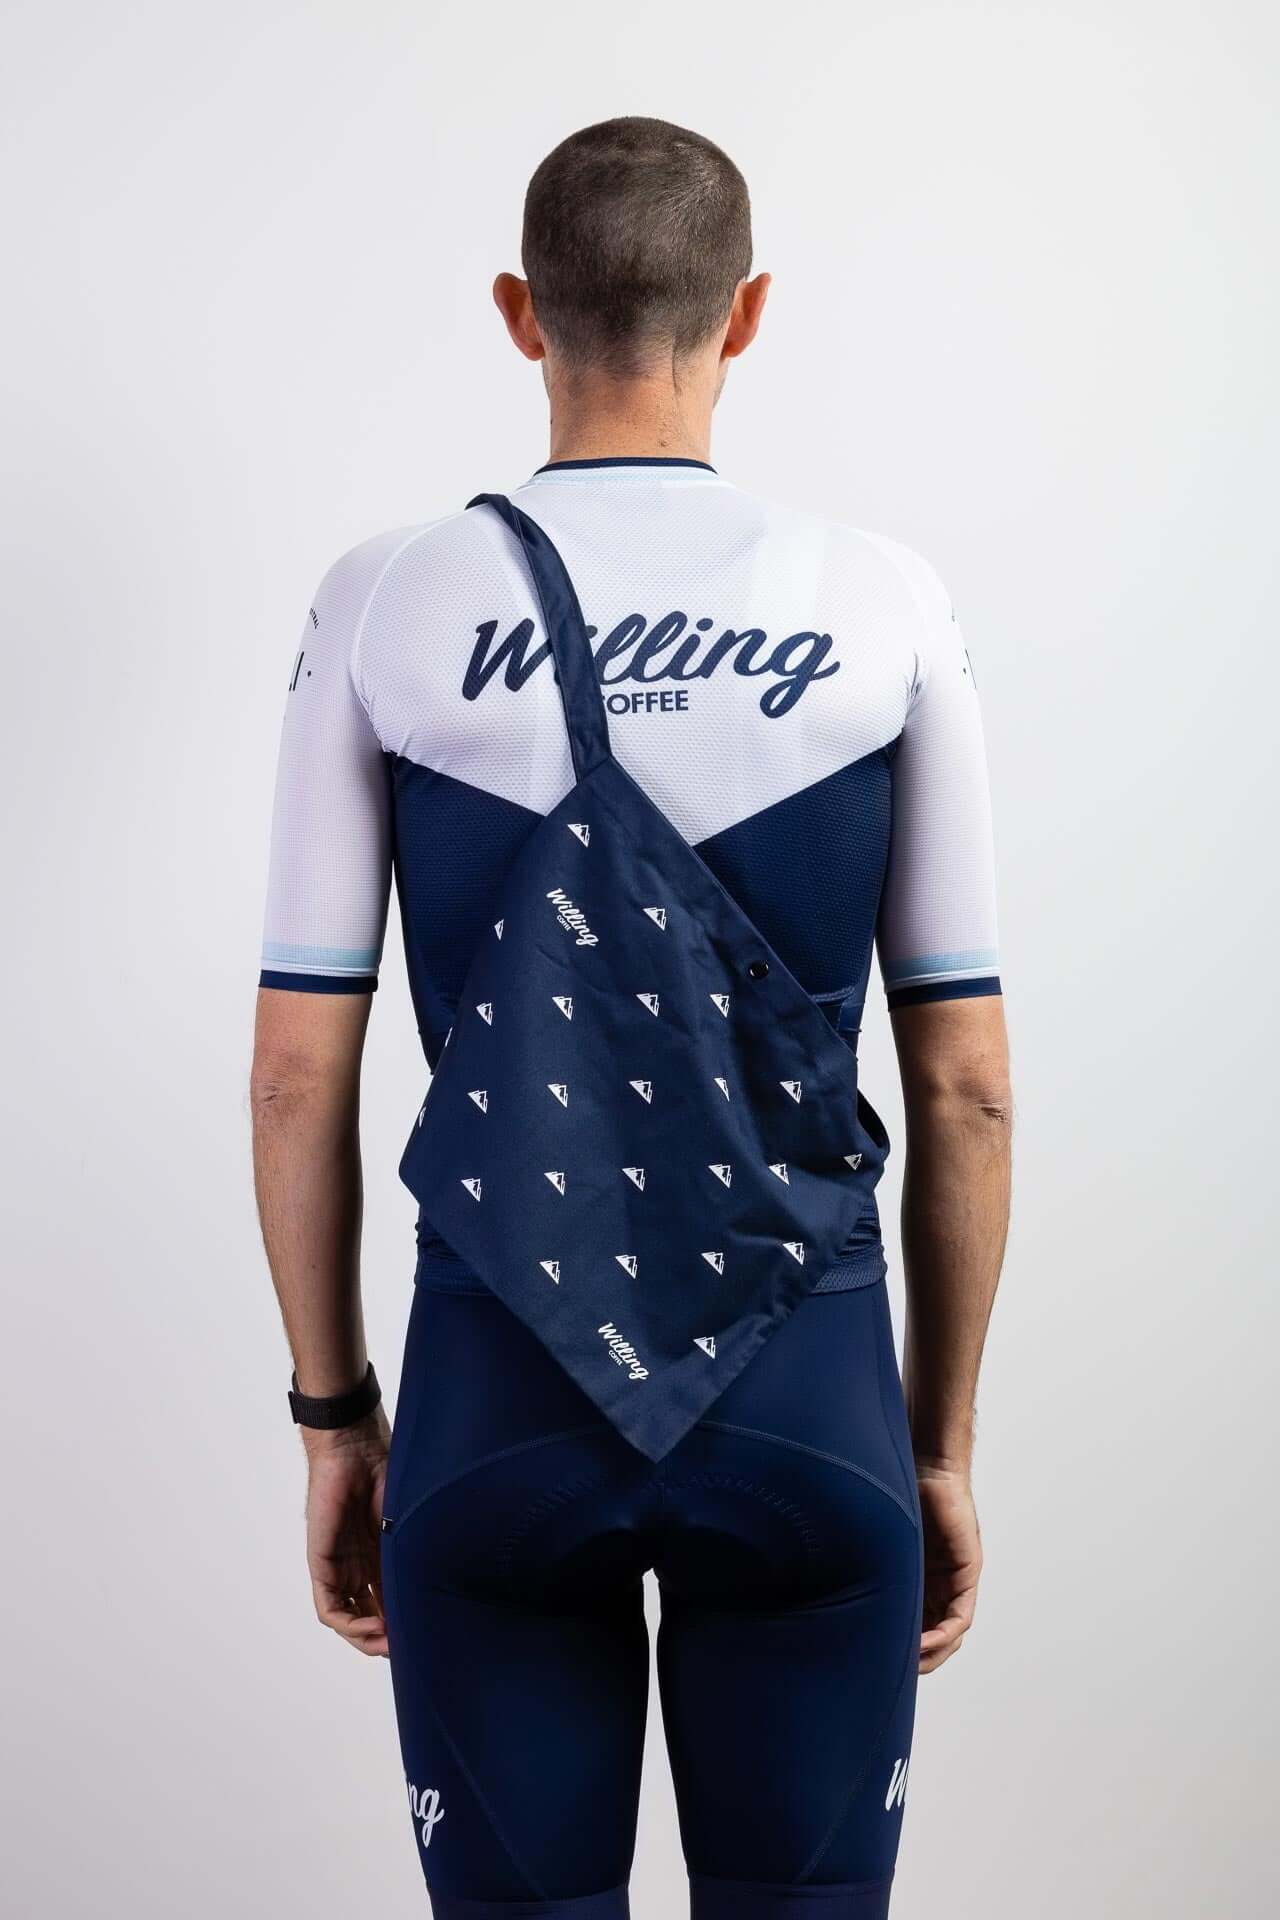 Willing Coffee Navy Musette Bag - an essential for cyclists on the go, perfect for storing snacks and essentials during your long rides